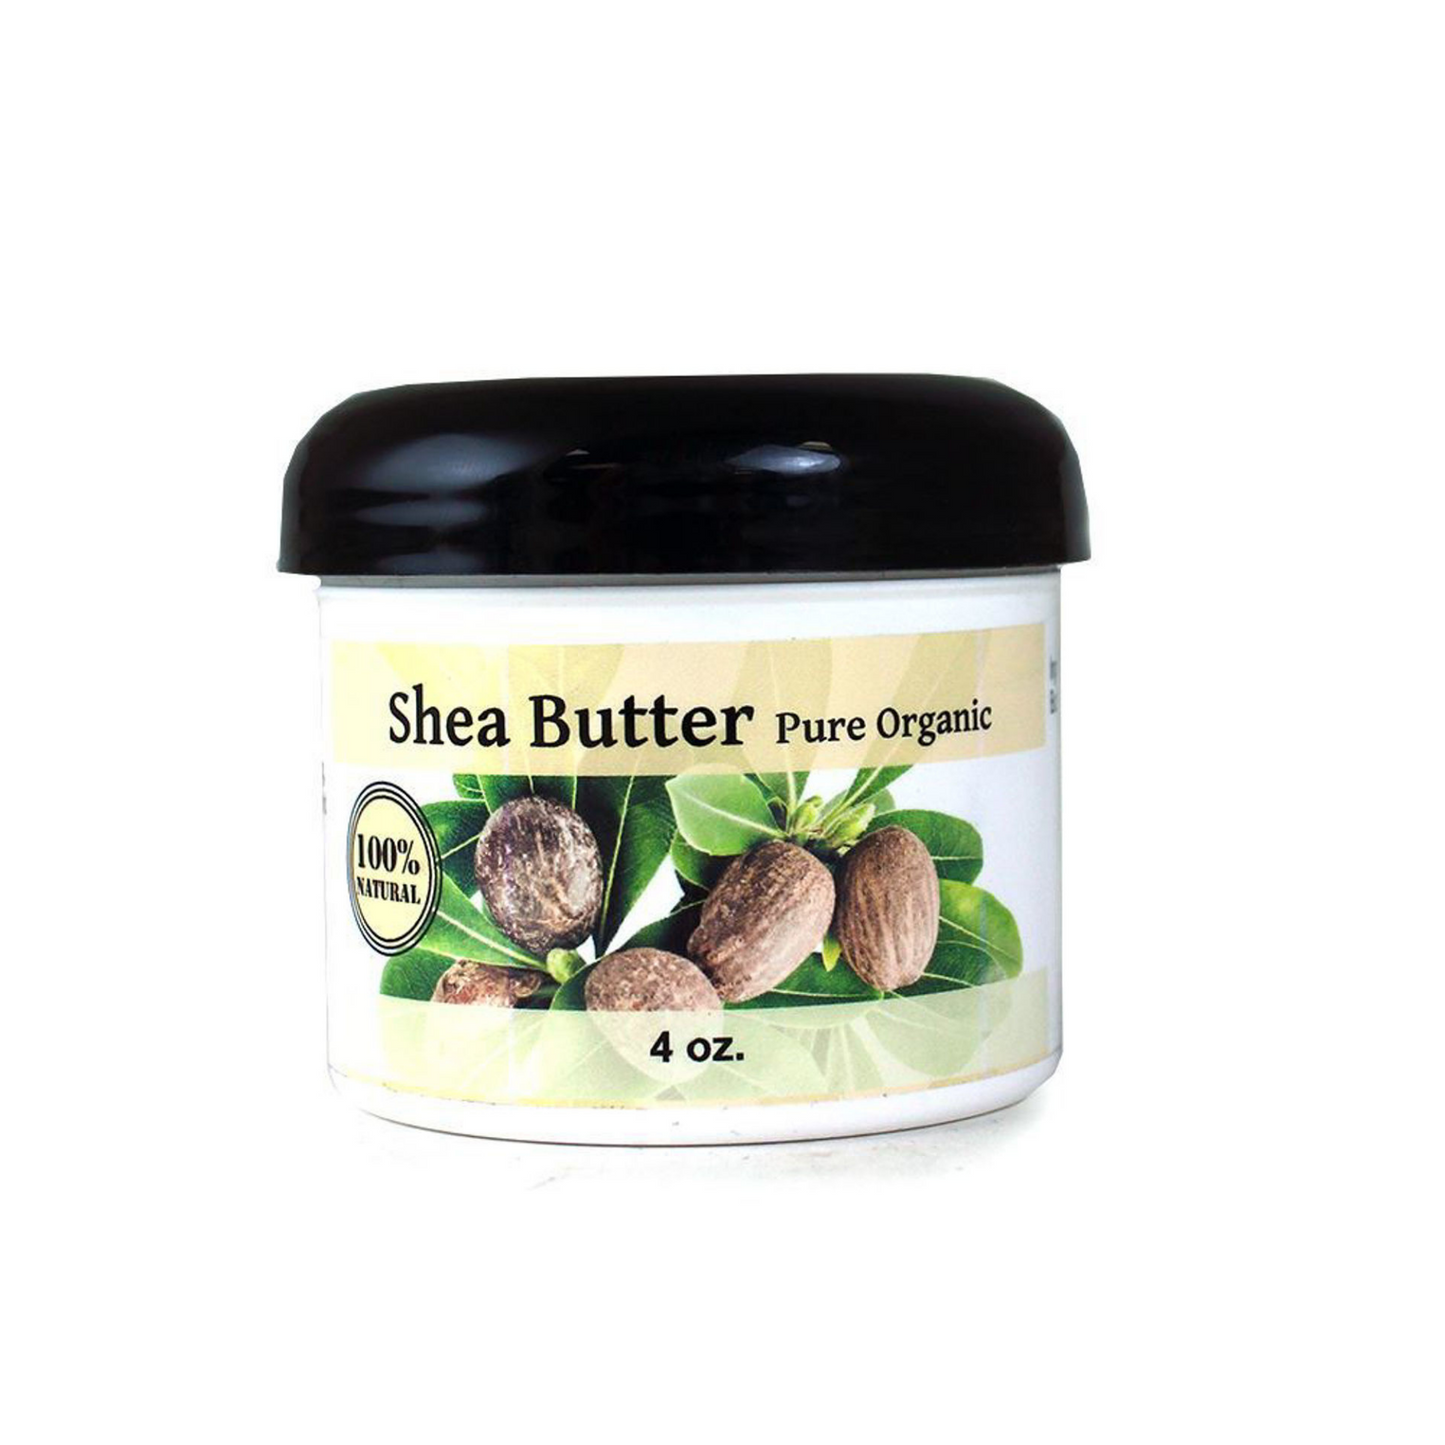 Primary Image of Organic Shea Butter 4oz